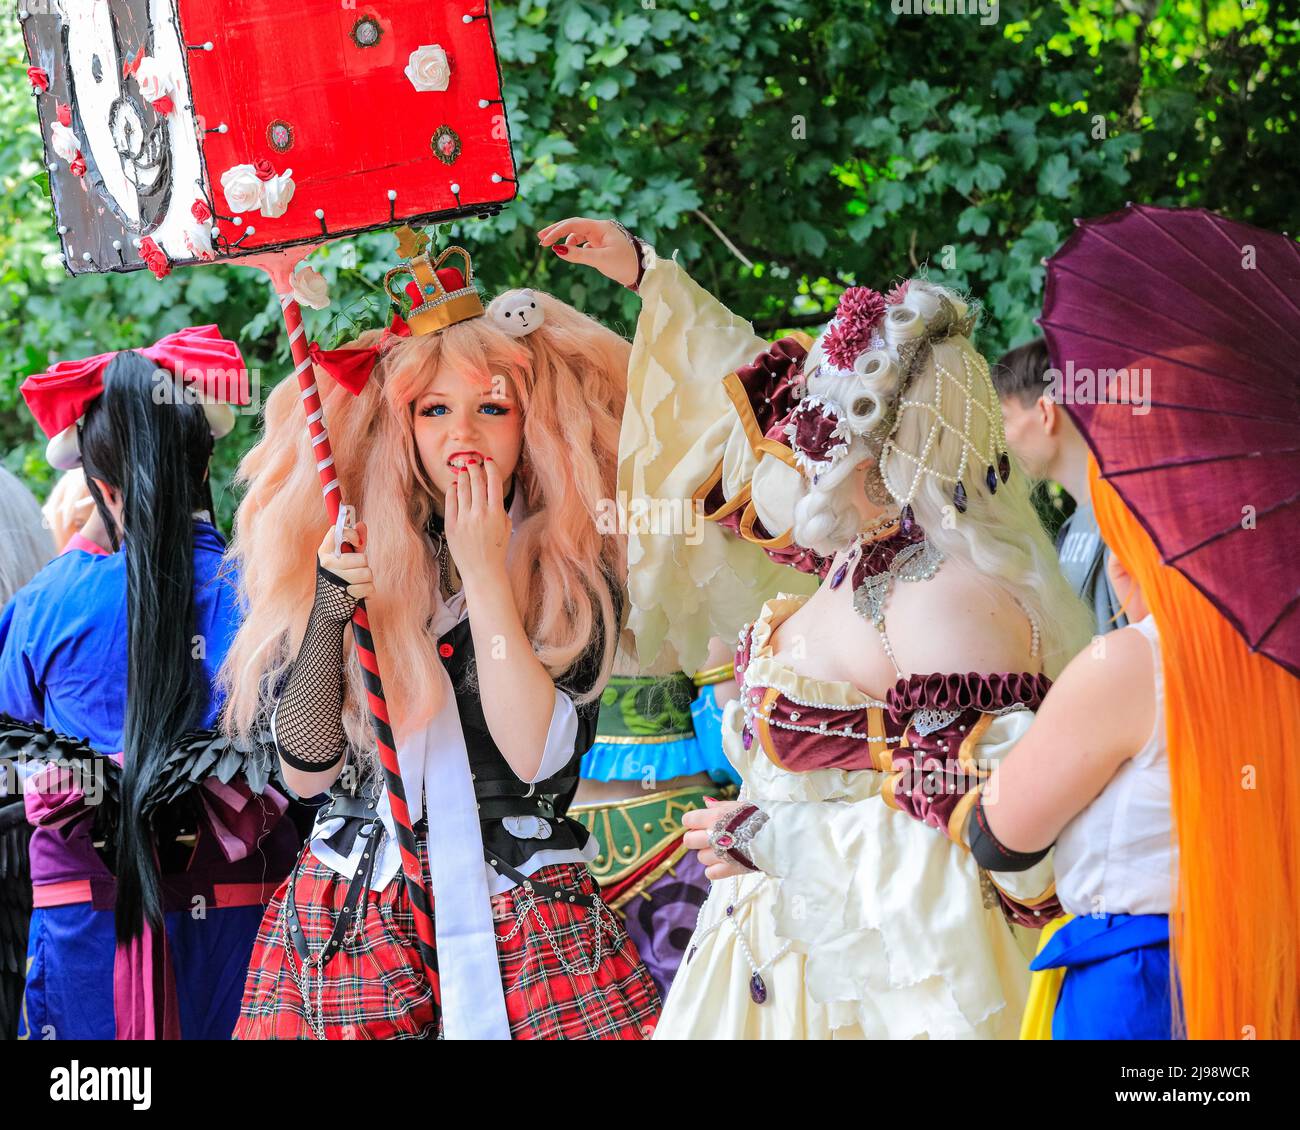 Düsseldorf, NRW, Germany. 21st May, 2022. Tens of thousands of visitors and cosplayers enjoy the warm sunshine along the river Rhine embankment in their outfits inspired by Japanese anime, video and games. Stage performances, cosplay, stalls and demonstrations of Japanese culture, sports and traditions are featured at Düsseldorf's annual Japan Day, celebrating Japan and the Japanese community in the city. Düsseldorf is home to the largest Japanese community in Germany. Credit: Imageplotter/Alamy Live News Stock Photo